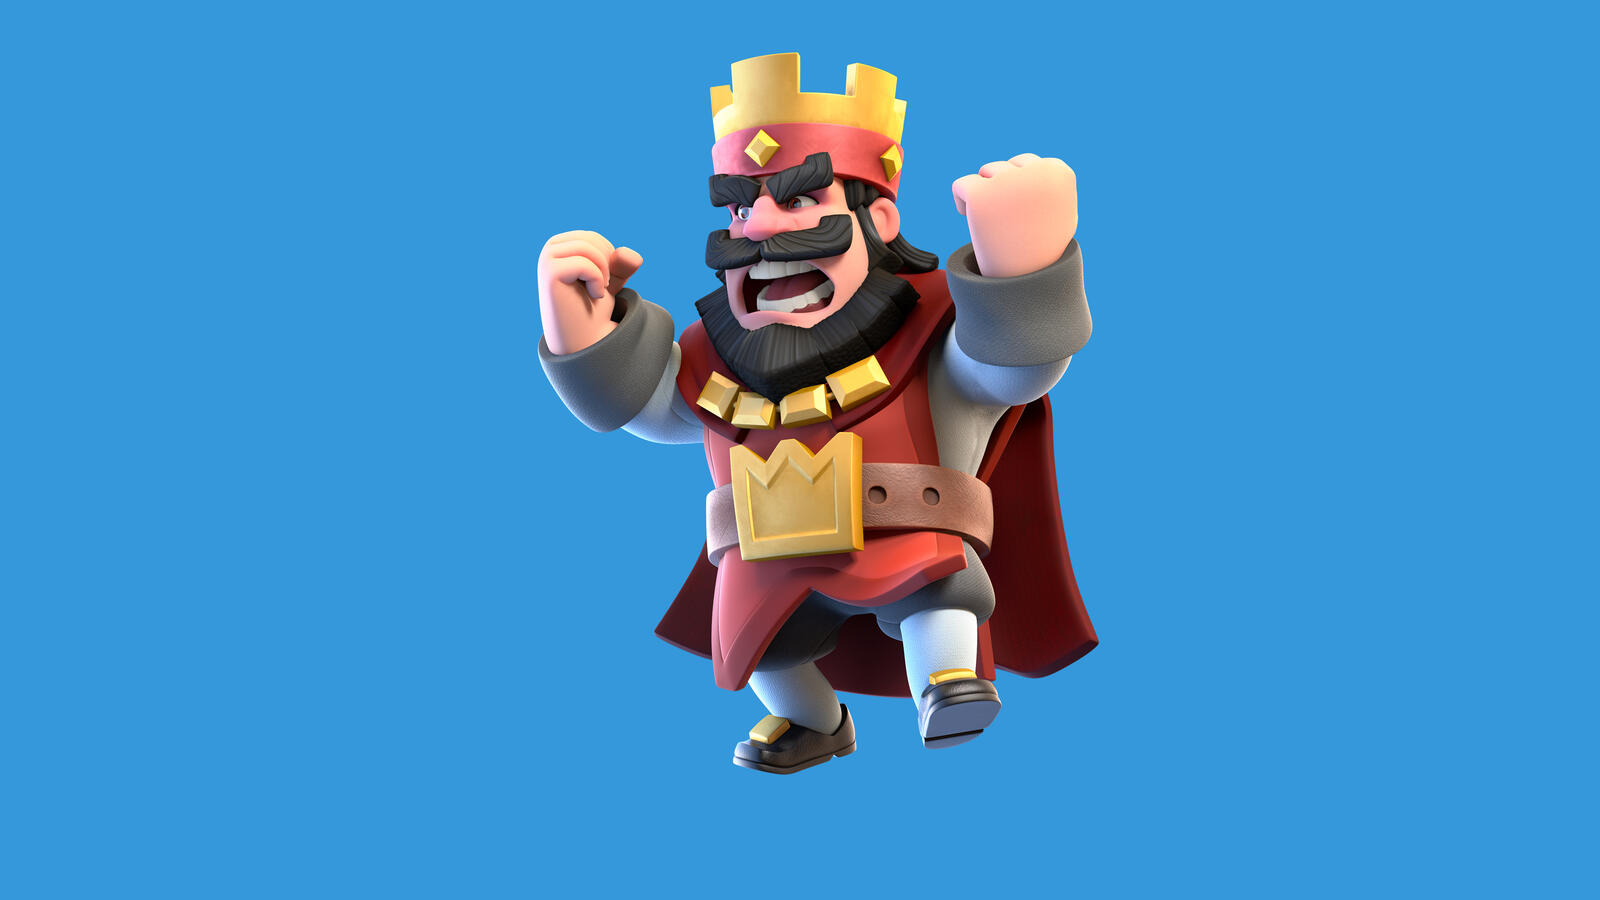 Free photo The king from the game clash royale